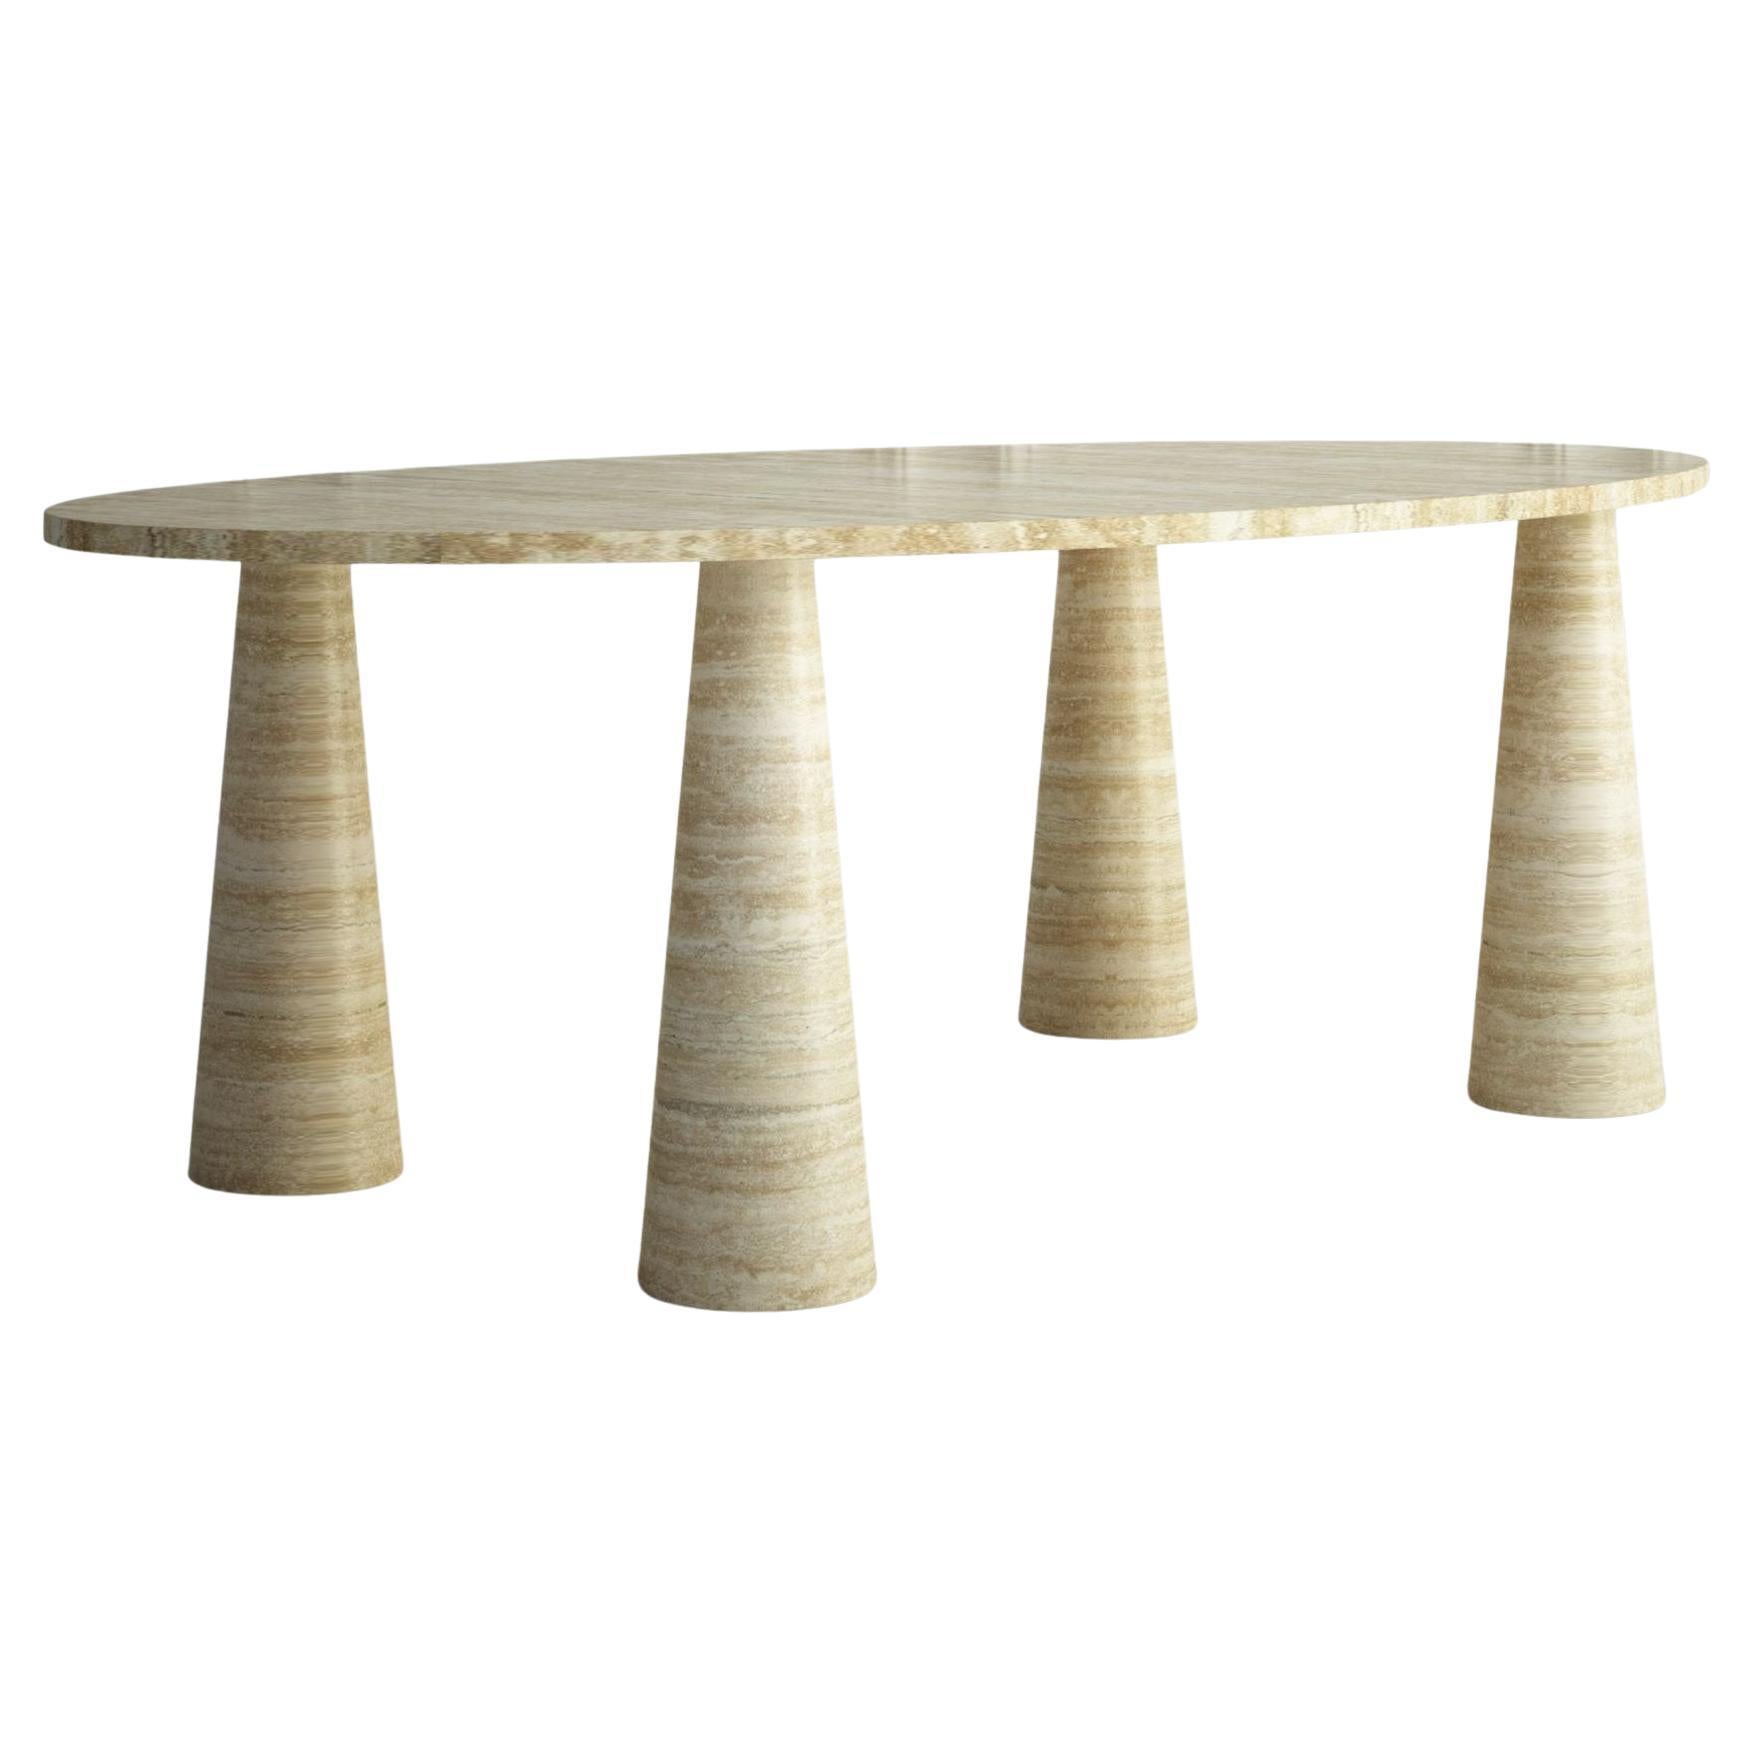 The Marianne: A Modern Stone Dining Table with an Oval Top and Four Tapered Legs For Sale